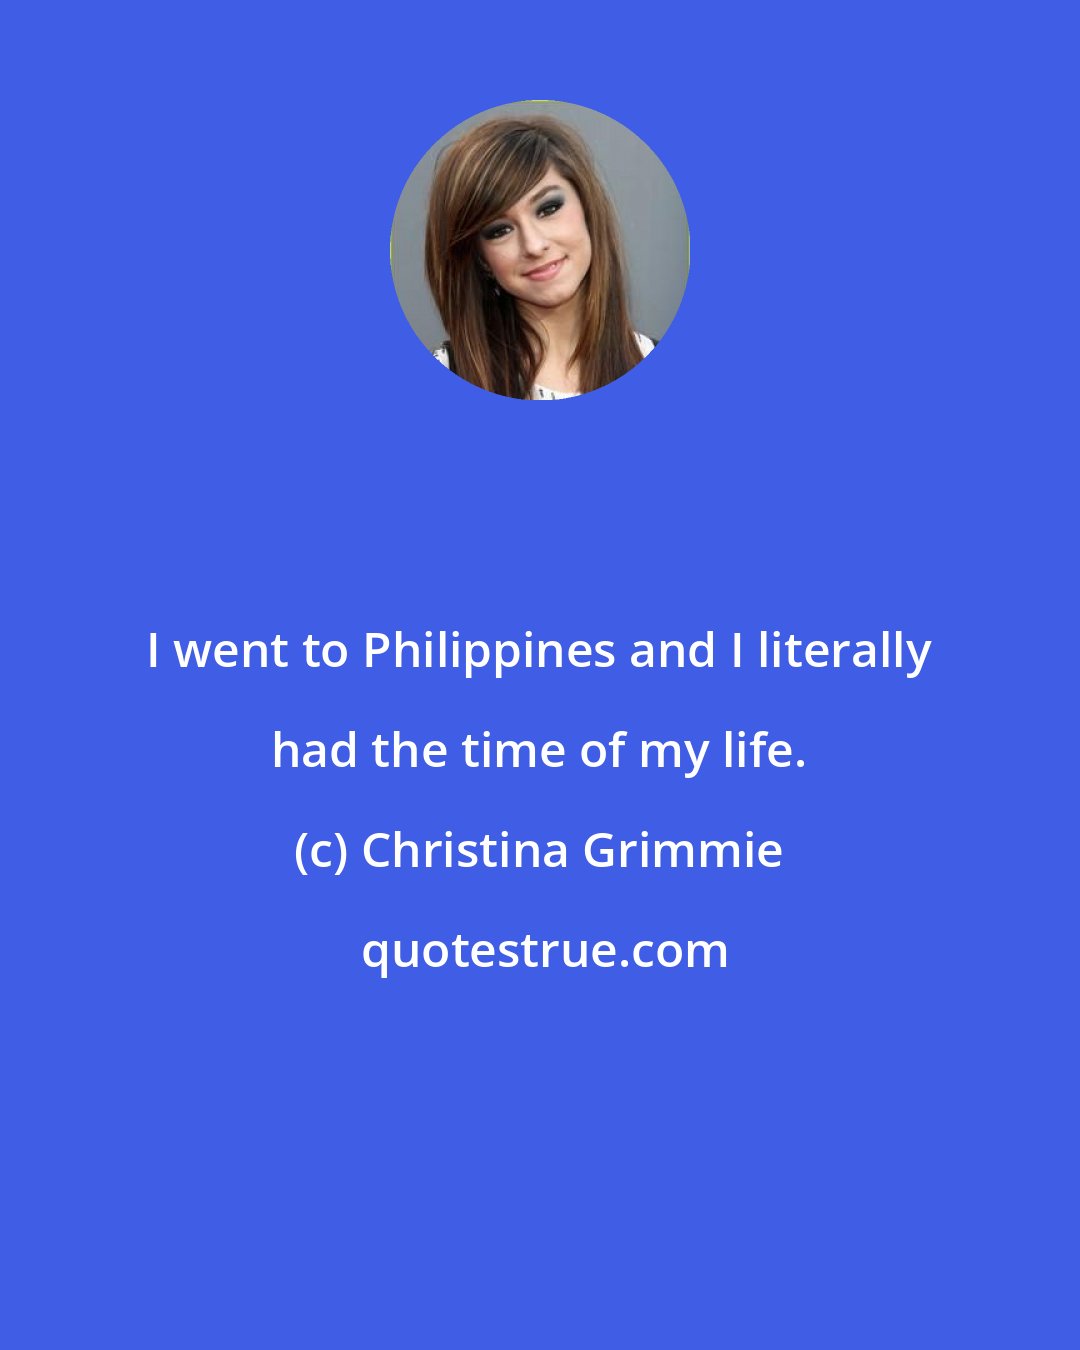 Christina Grimmie: I went to Philippines and I literally had the time of my life.